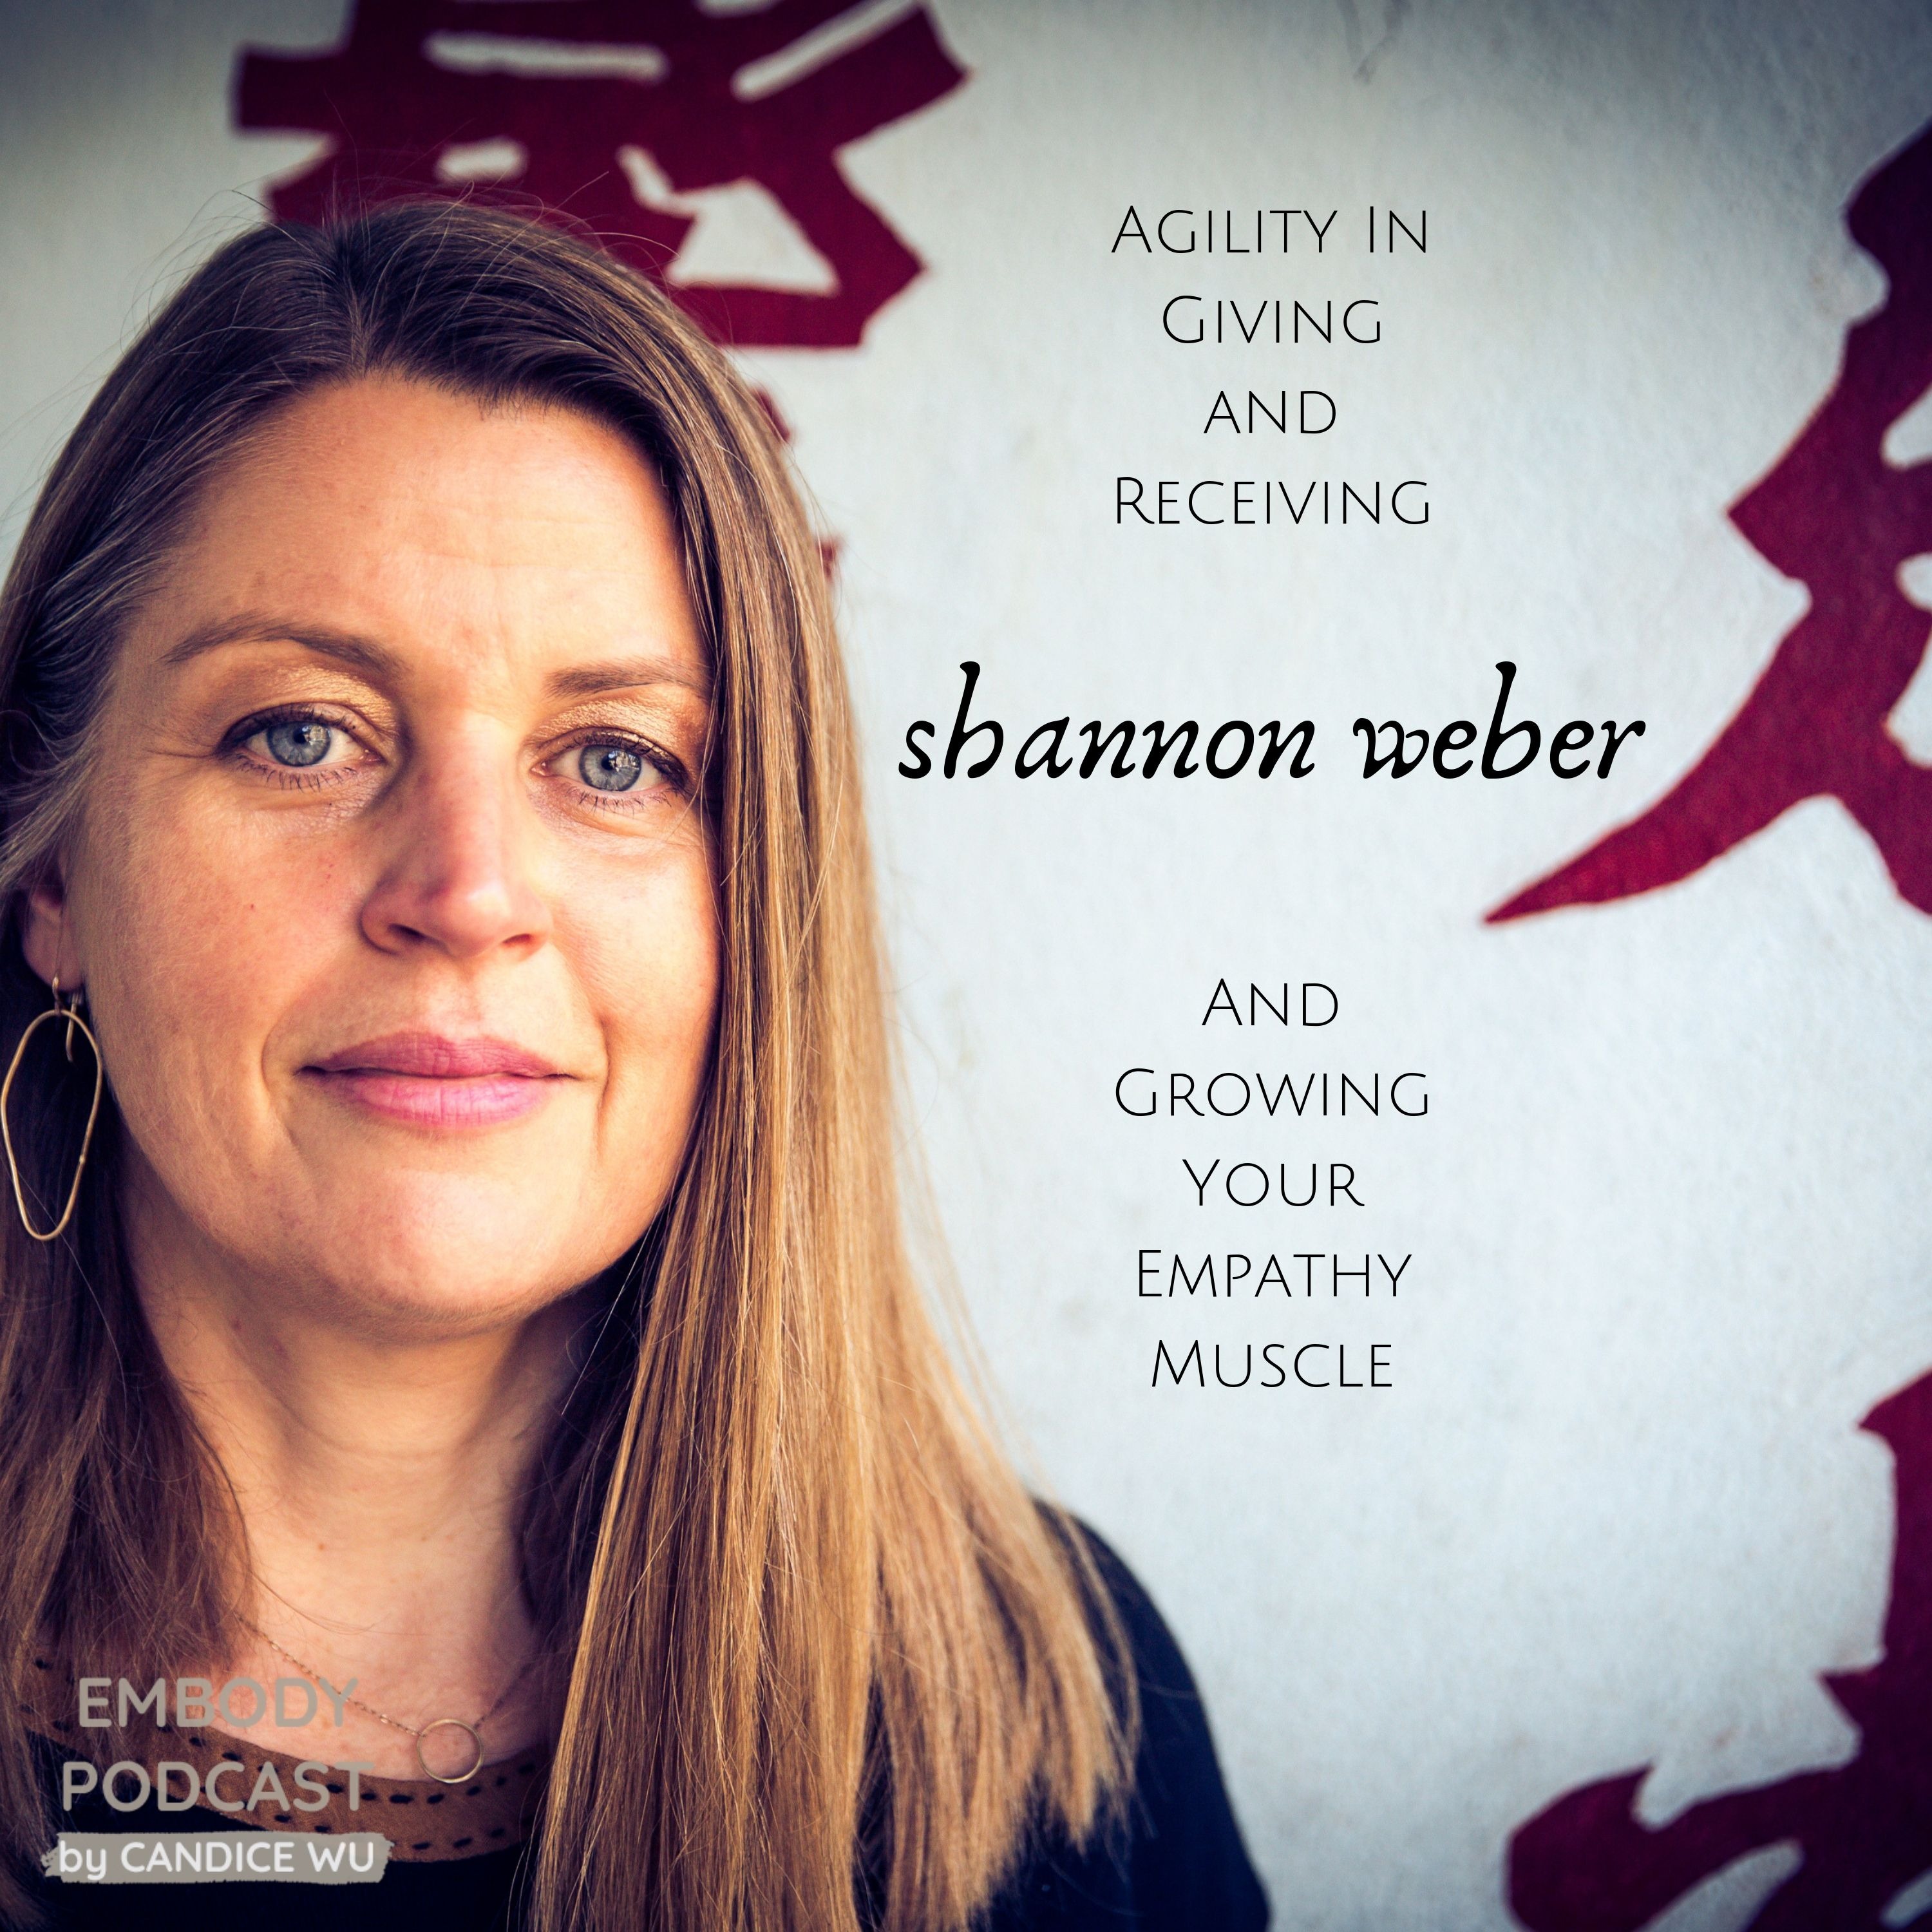 85: Shannon Weber on Agility In Giving and Receiving + Growing Your Empathy Muscle